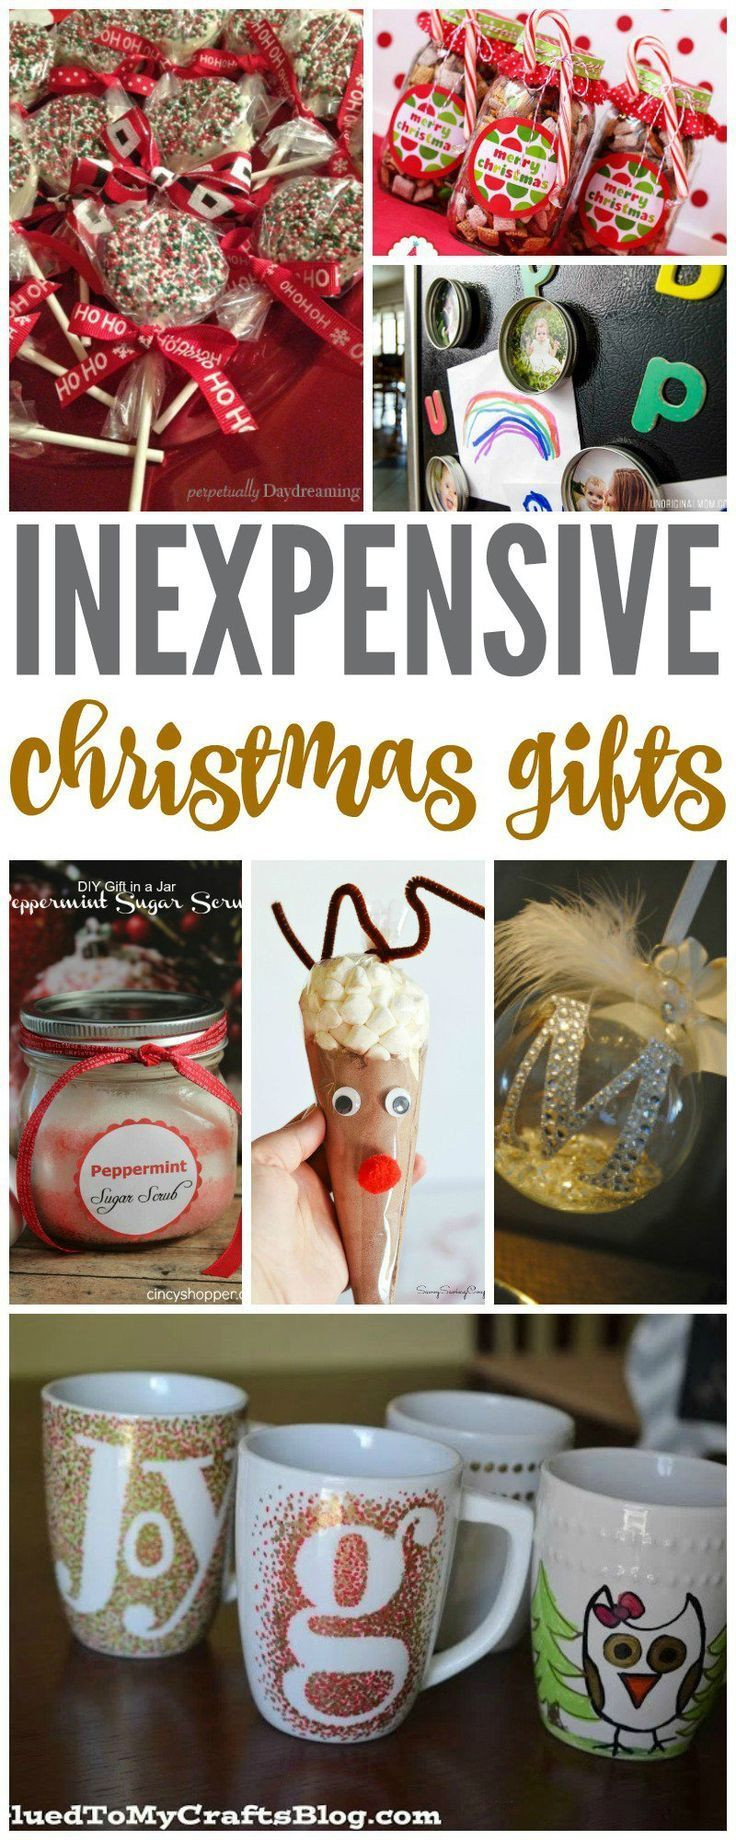 Best Gift Ideas For Coworkers
 82 best Gift Ideas for Coworkers images on Pinterest